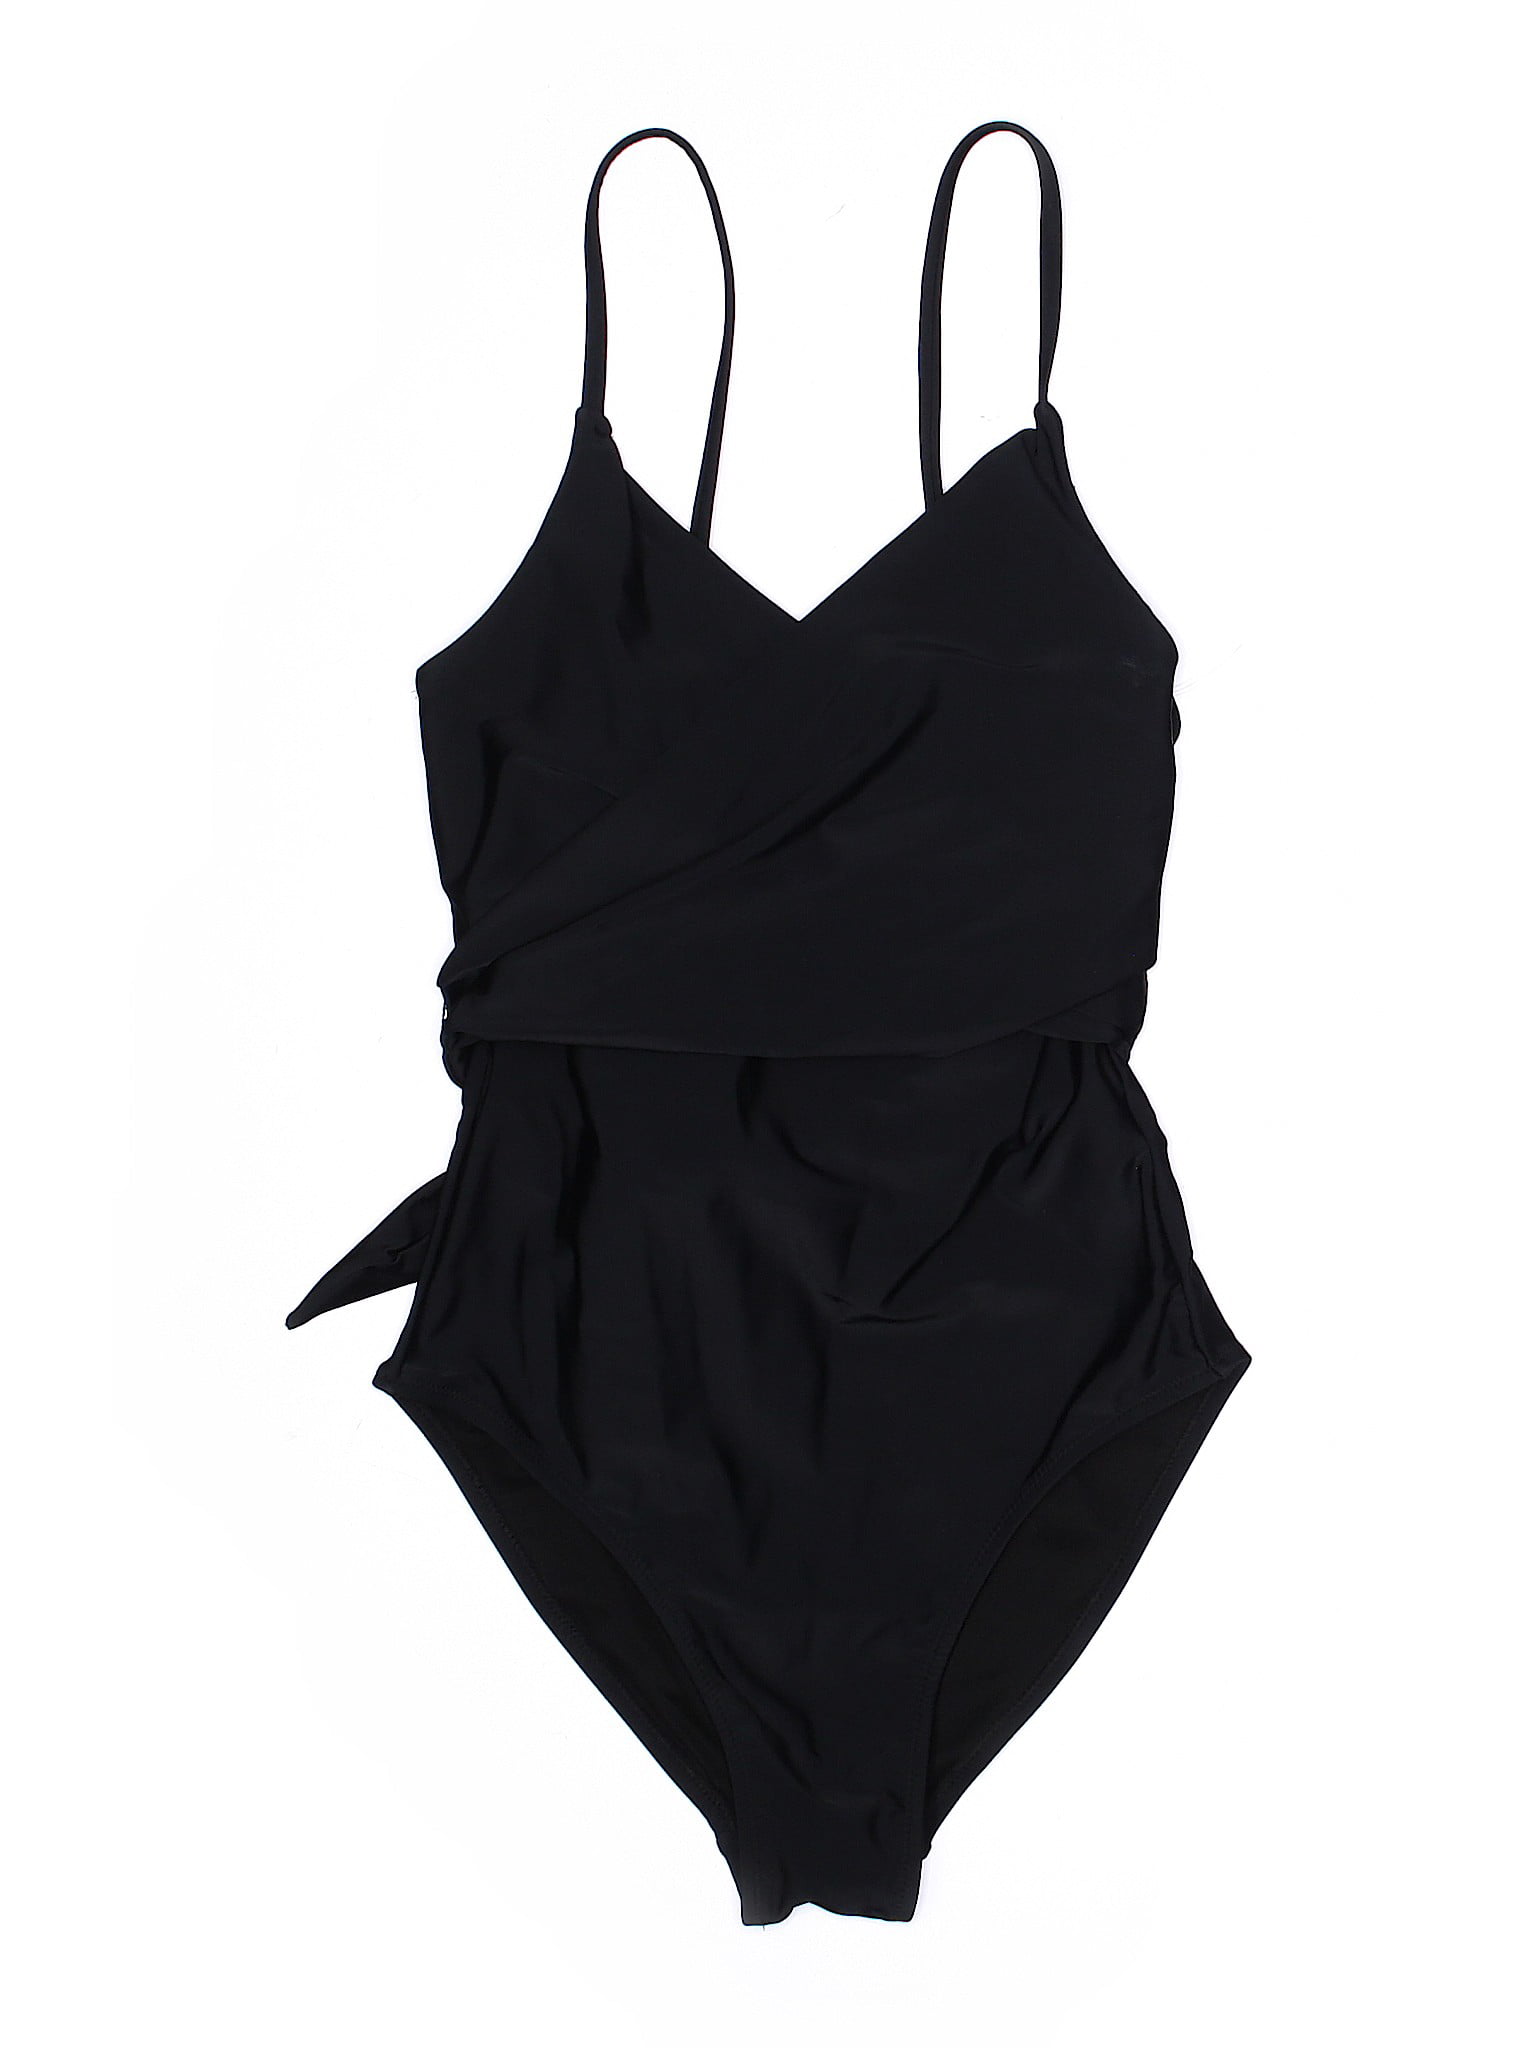 Old Navy - Pre-Owned Old Navy Women's Size S One Piece Swimsuit ...